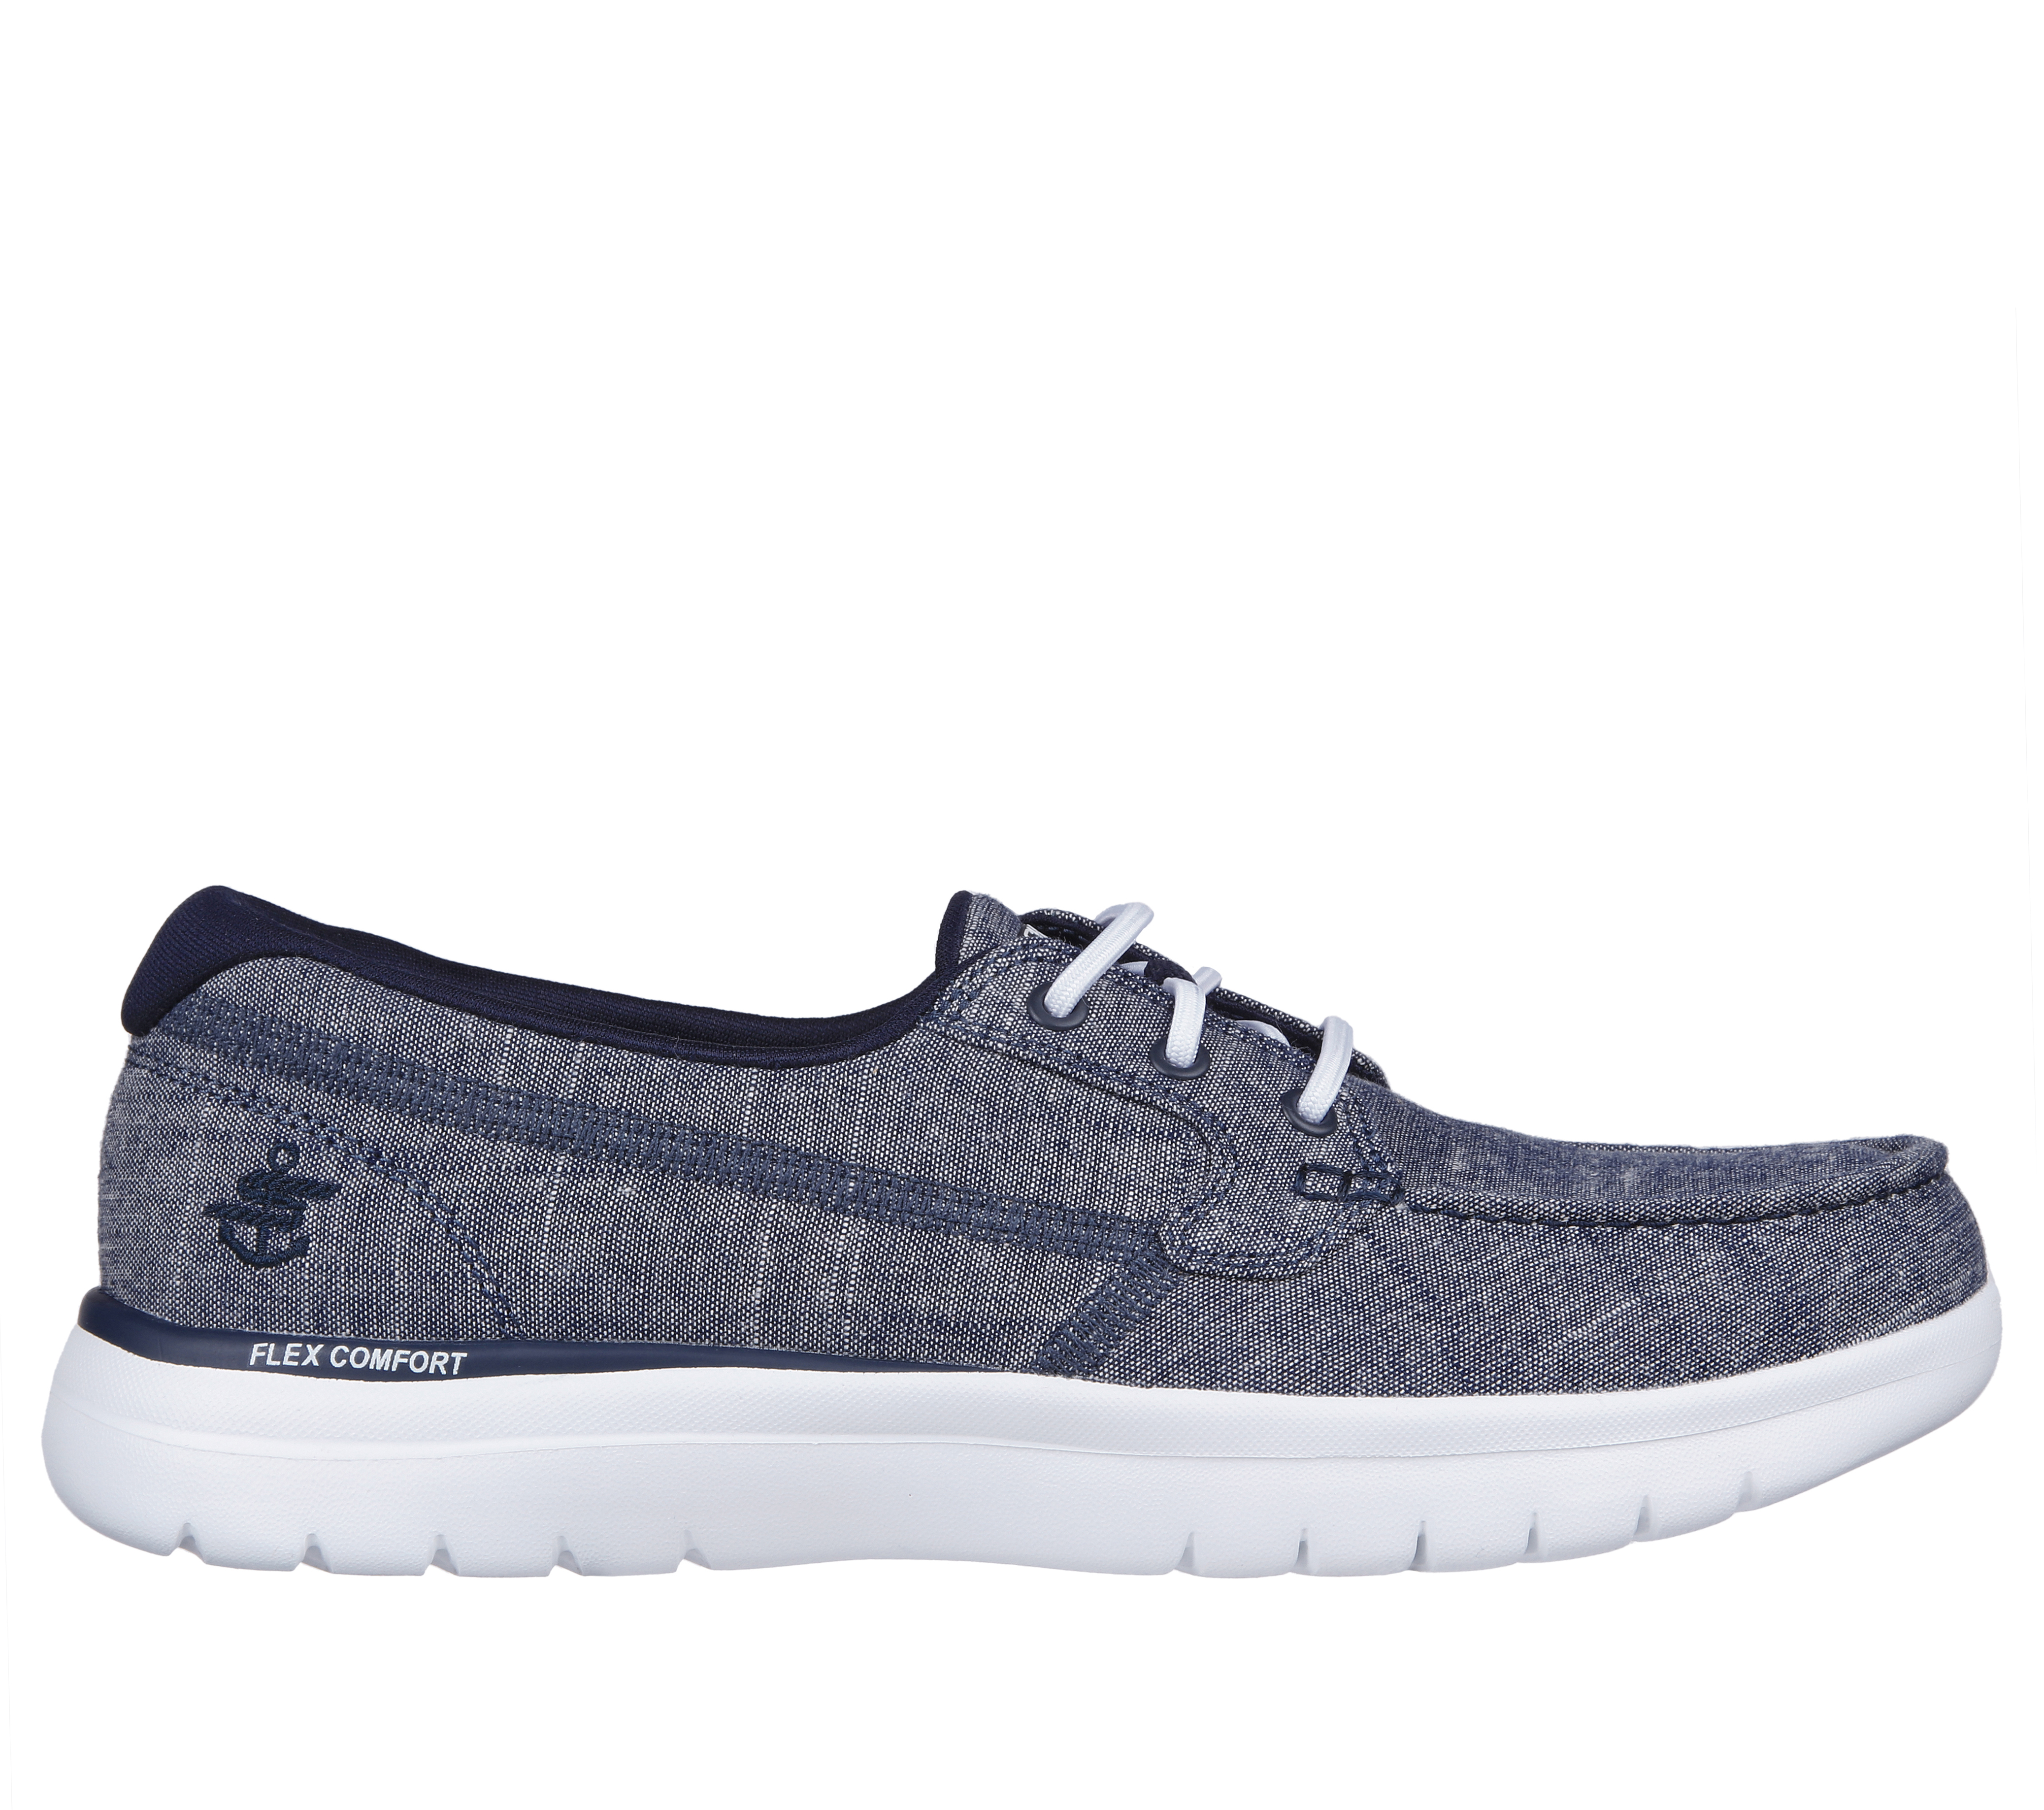 Shoppers Love These Skechers Sneakers for Travel